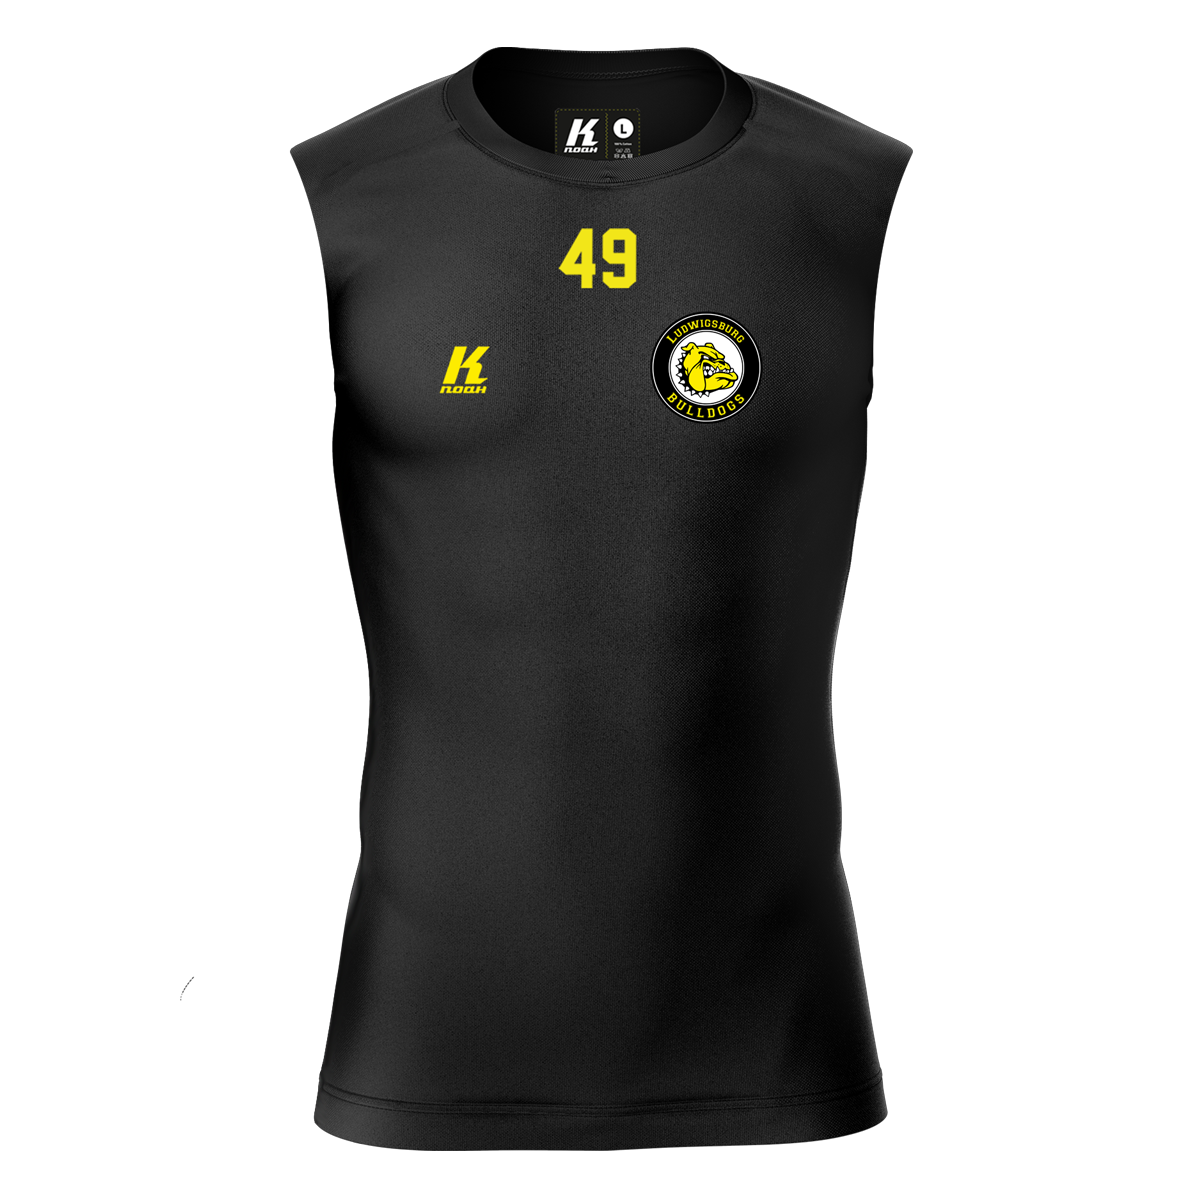 LB-Bulldogs K.Tech Compression Sleeveless Shirt black with Playernumber/Initials